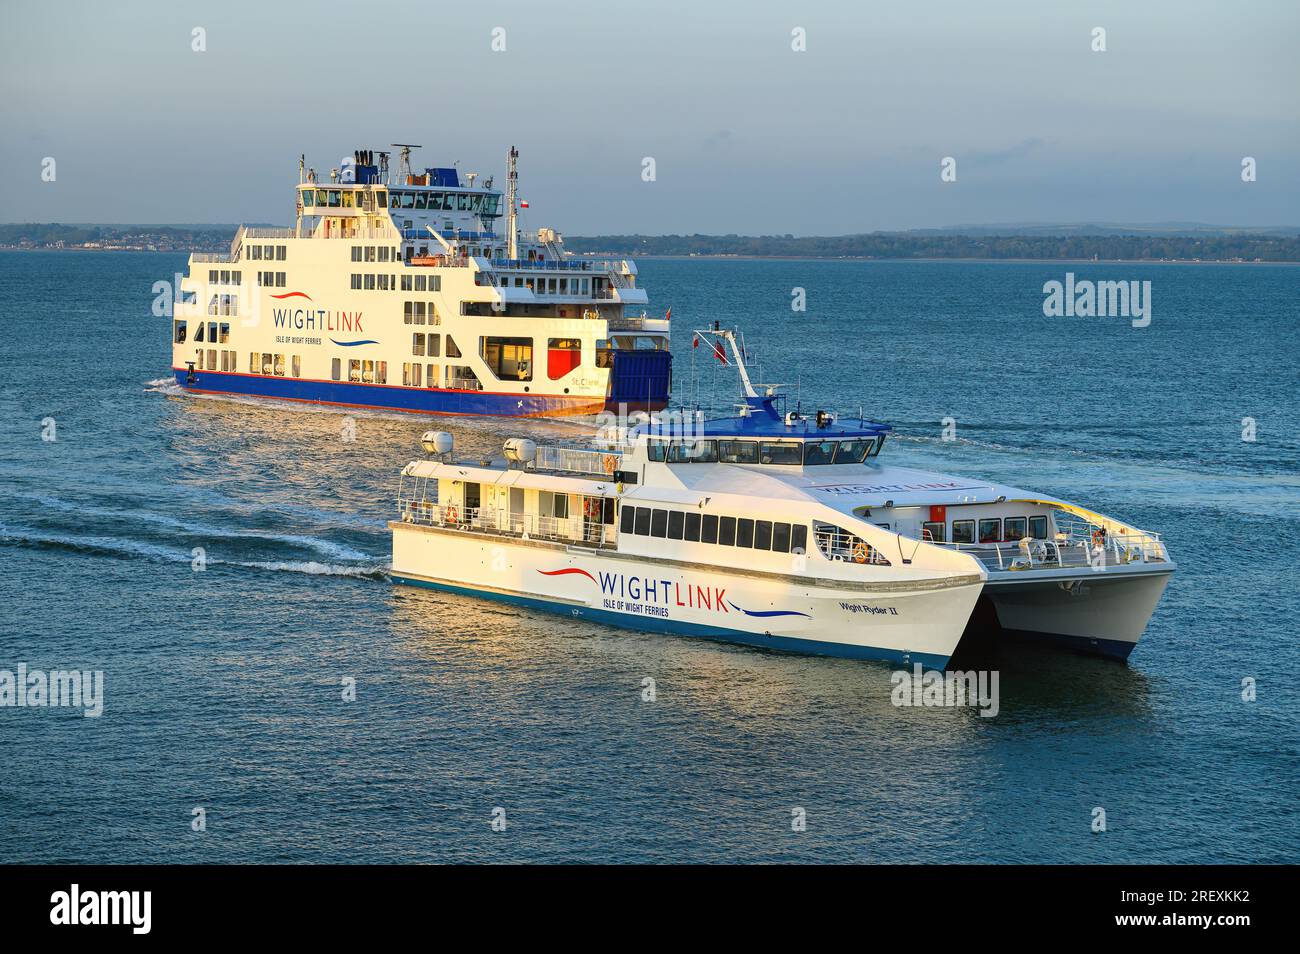 Wightlink passenger ferries passing. The company operates car and passenger services from Portsmouth to the Isle of Wight. Stock Photo